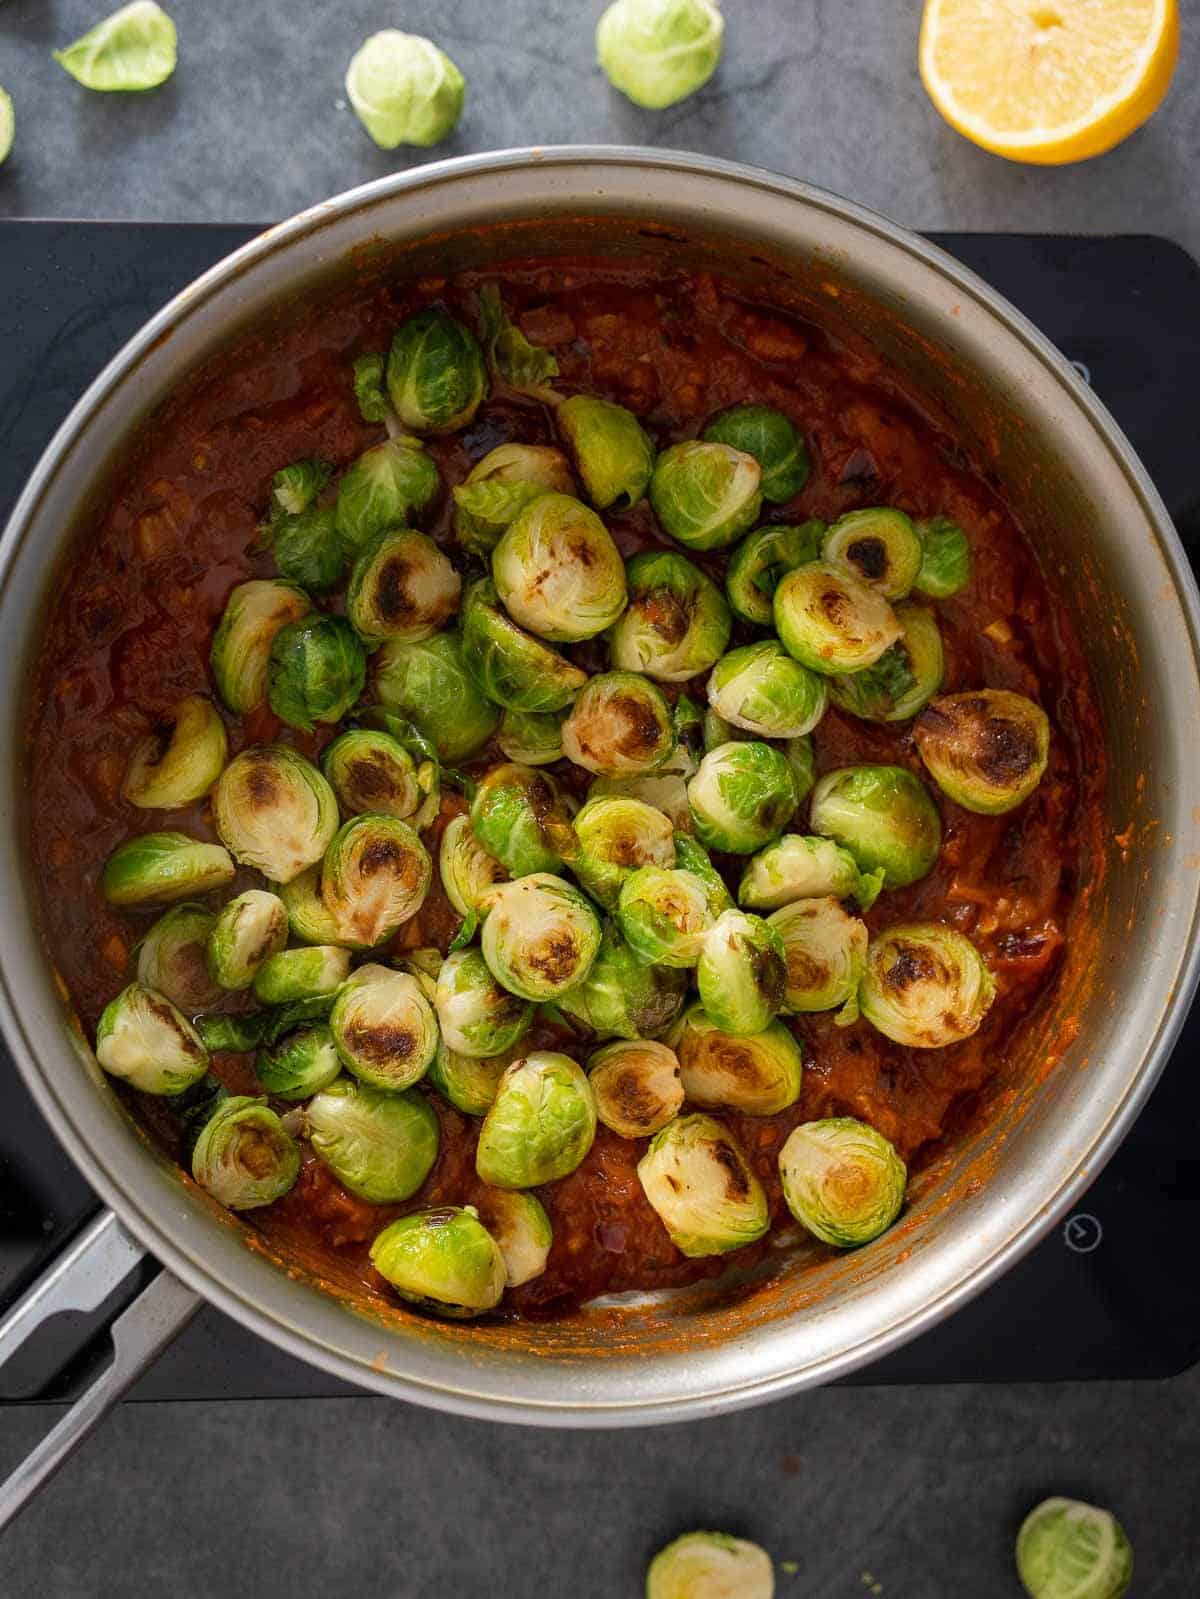 add the seared Brussels sprouts to the tomato sauce mixture.